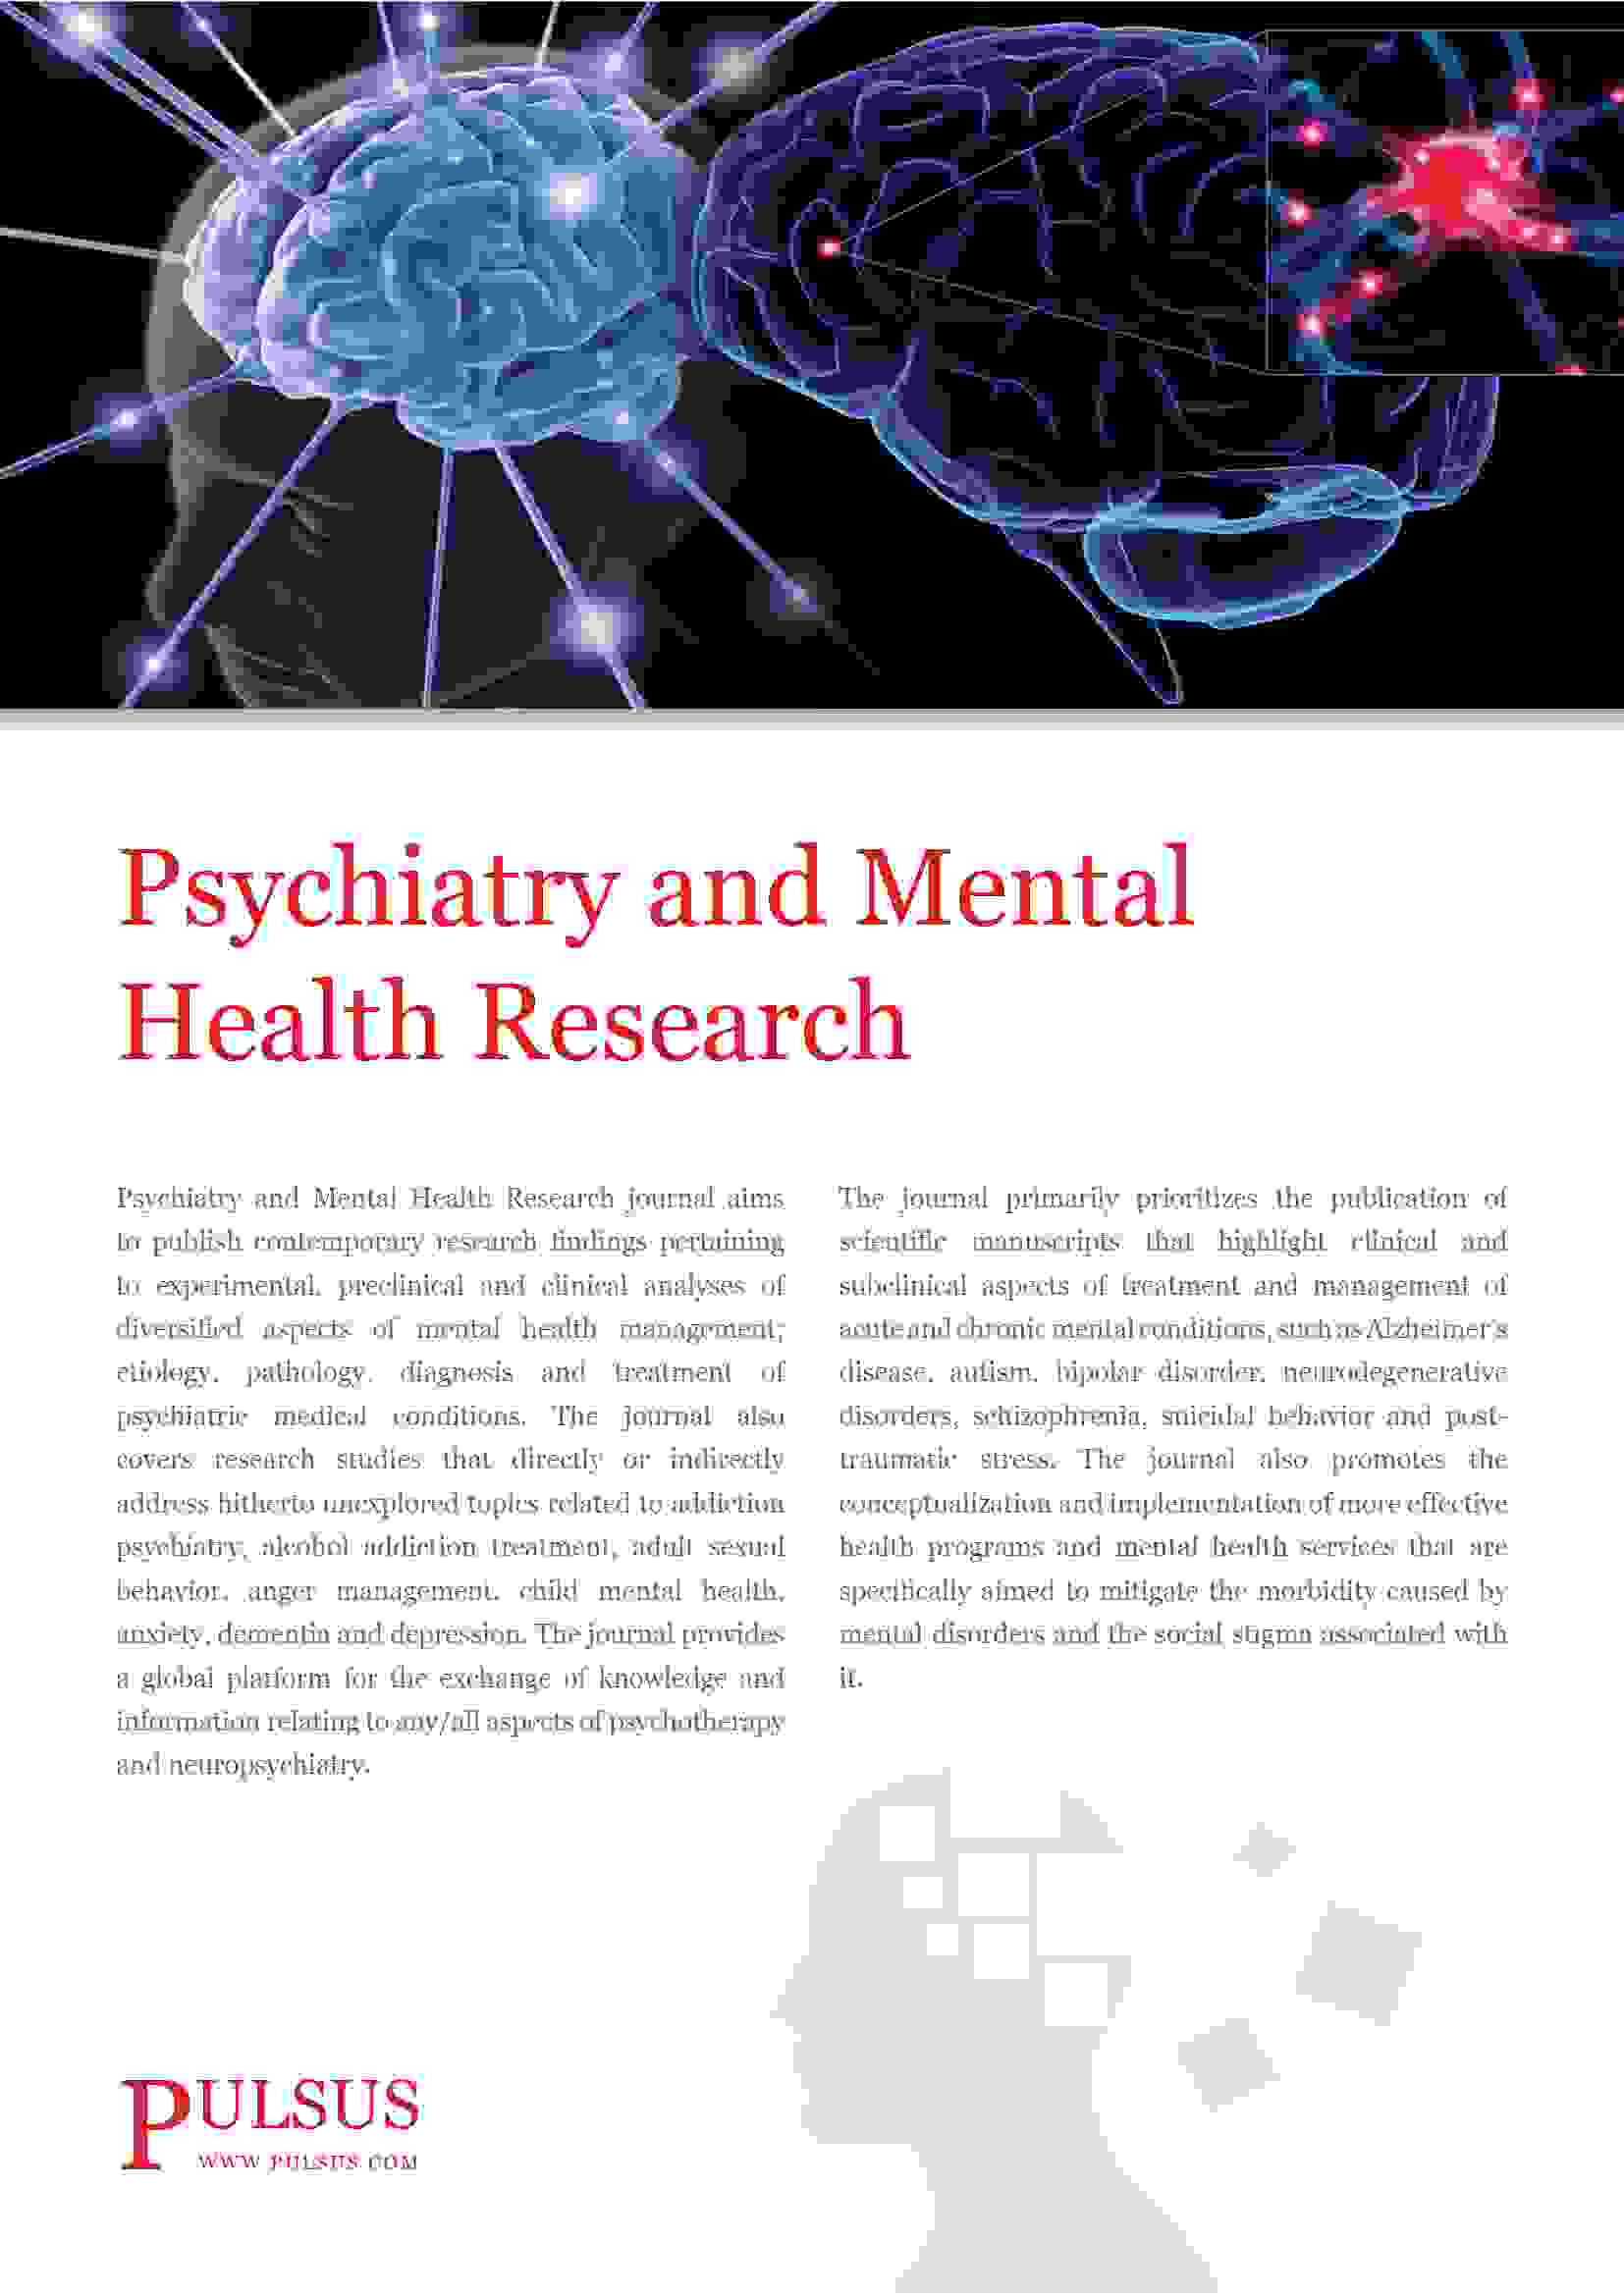 Psychiatry and Mental Health Research